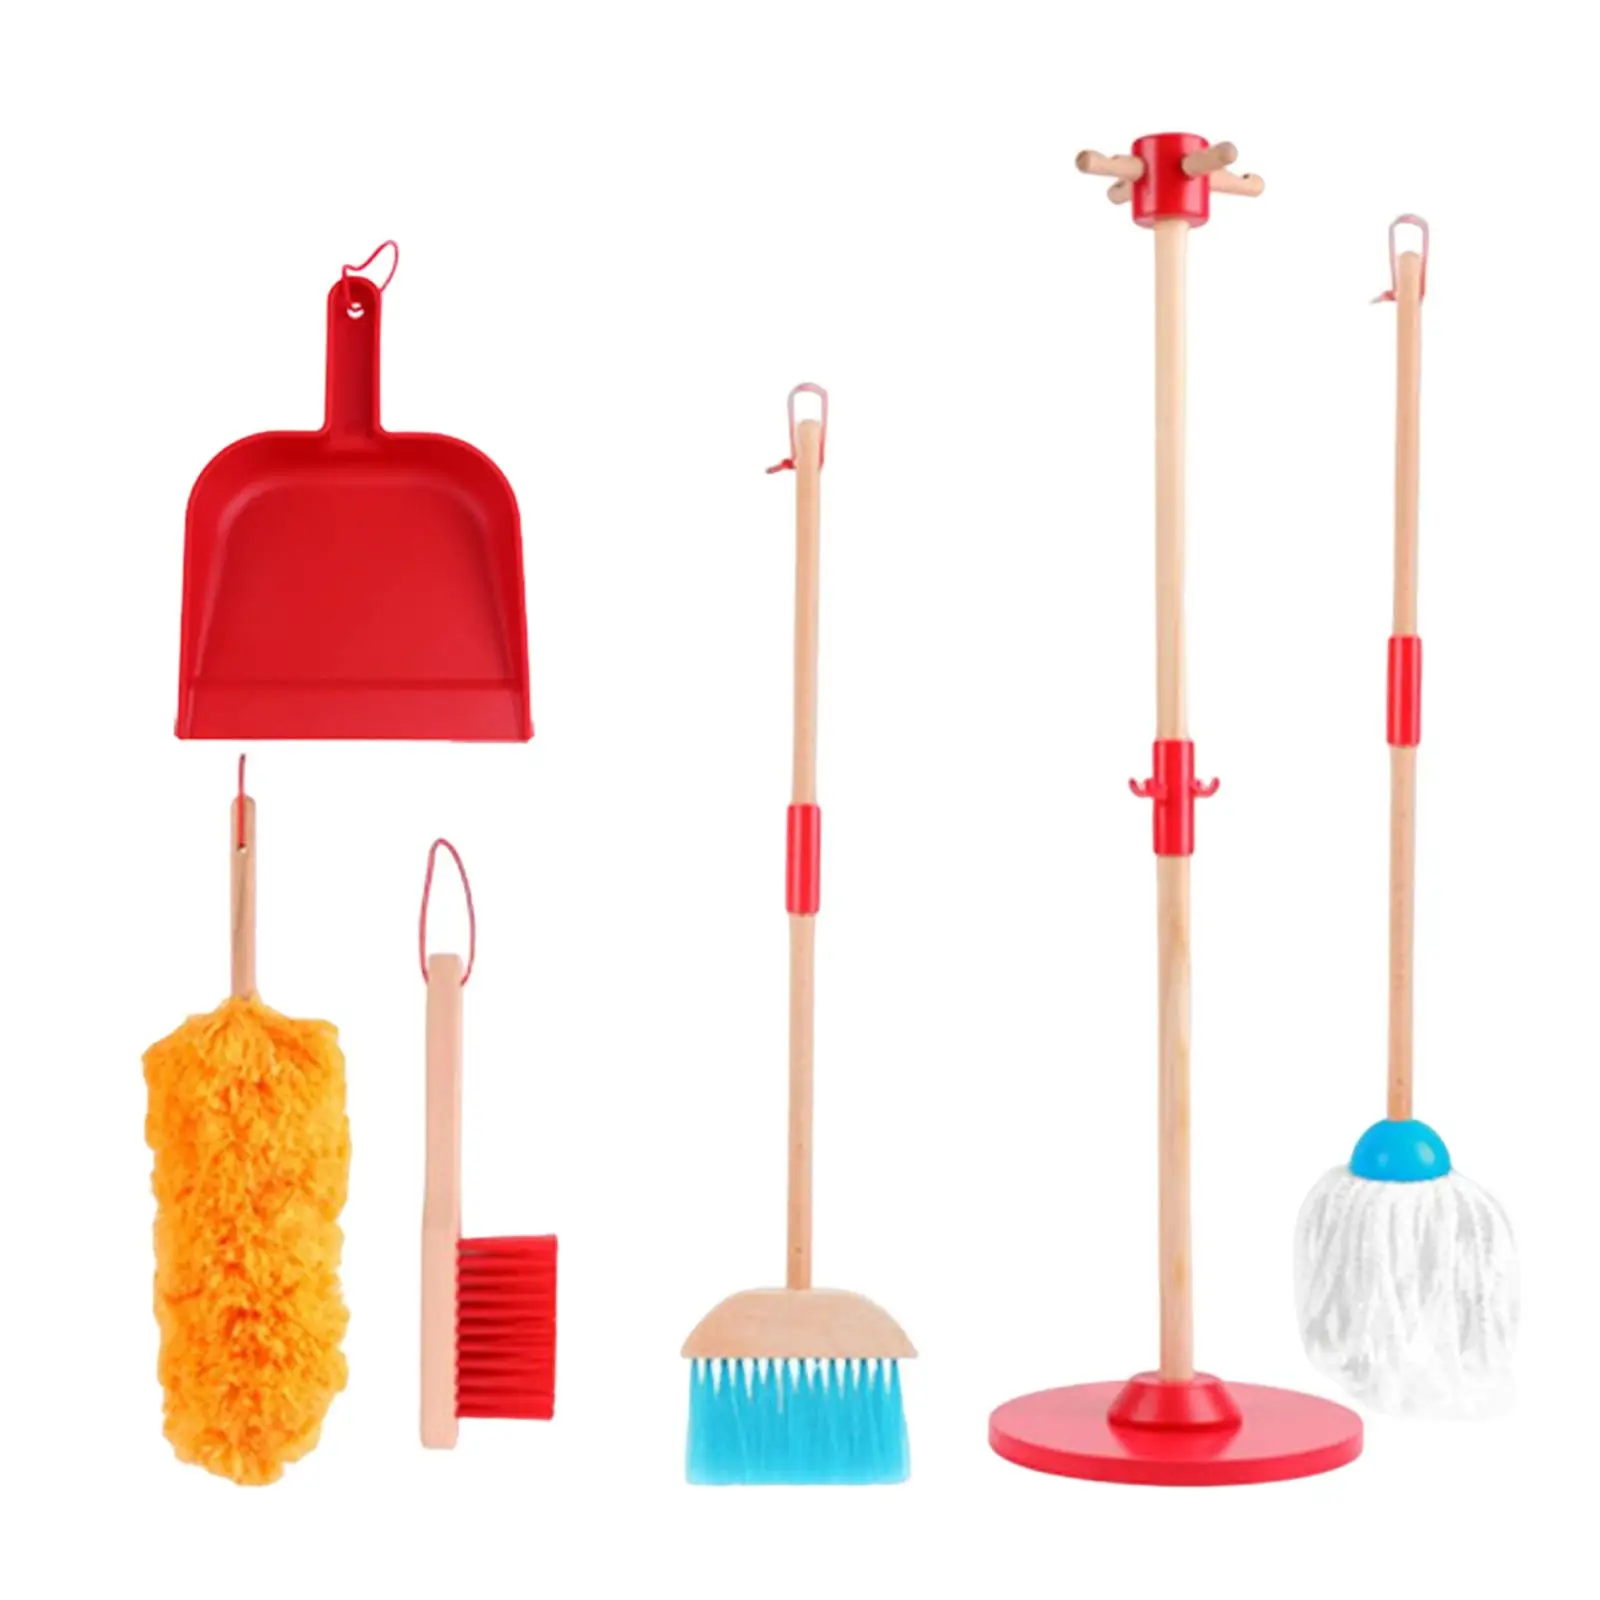 6  Household Cleaning Set for Kids Broom Brush Mop Dustpan Vacuum Cleaner Toys for Girls Boys Ages -6 Years Old Around